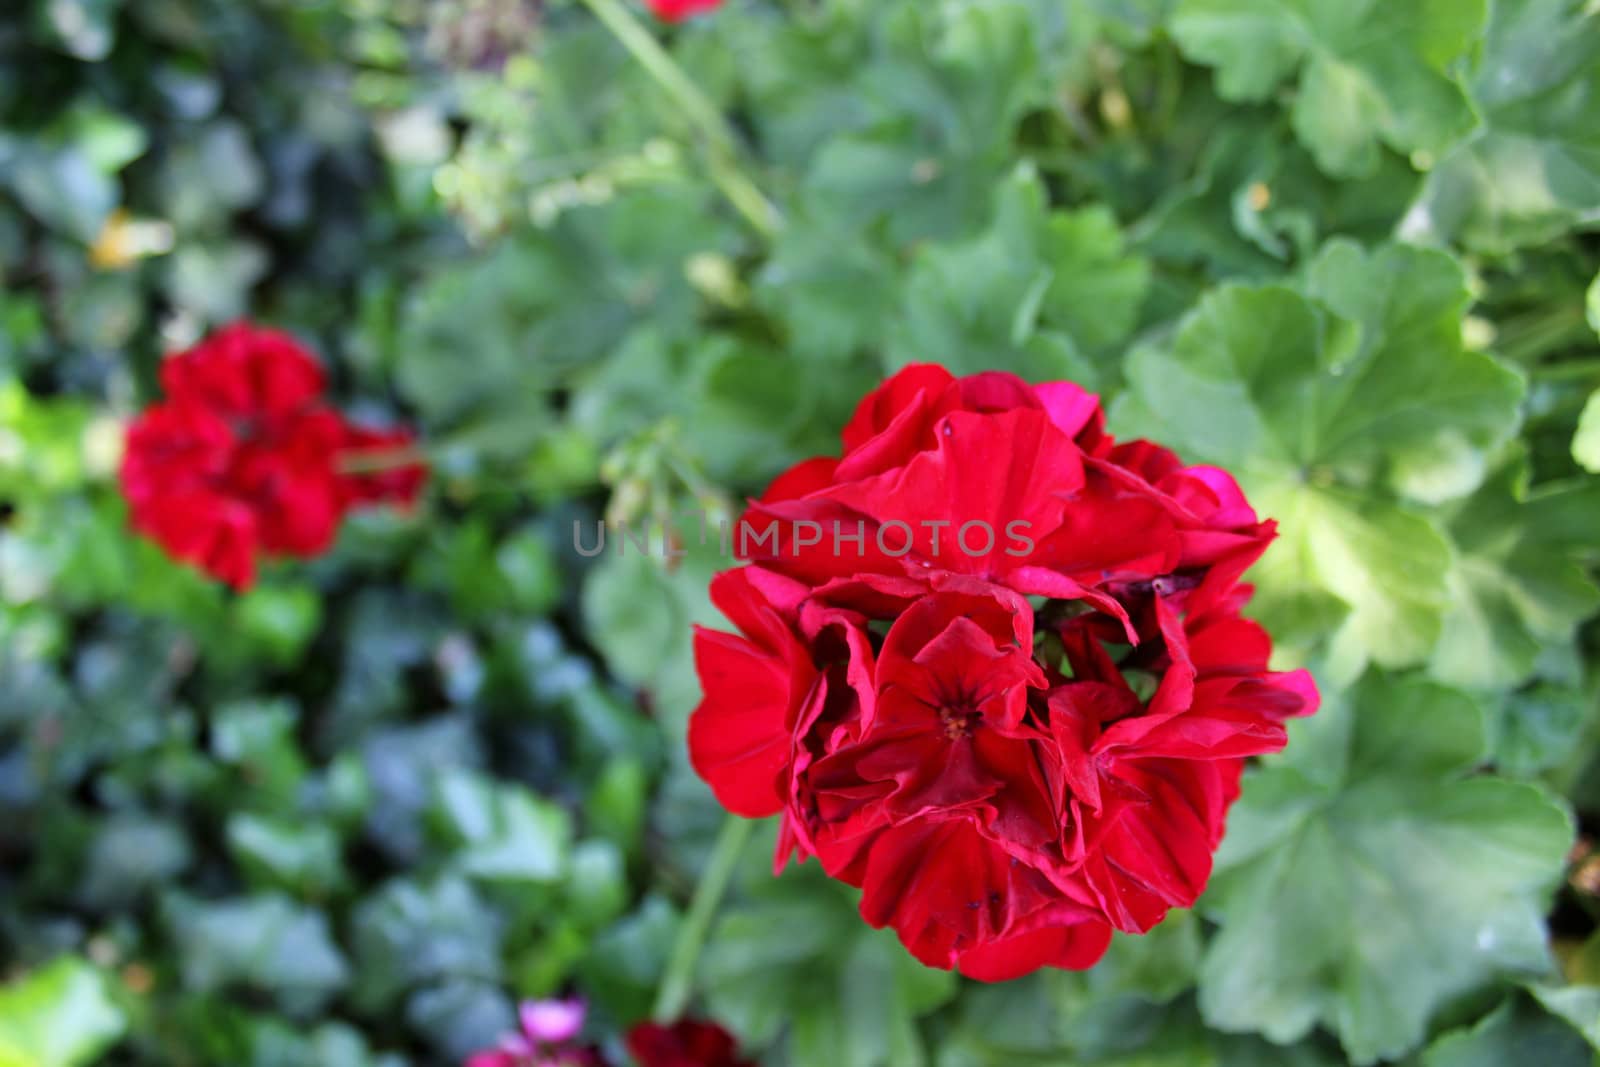 The Geranium flower can be an annual, biennial or a perennial plant and comes in various colors.